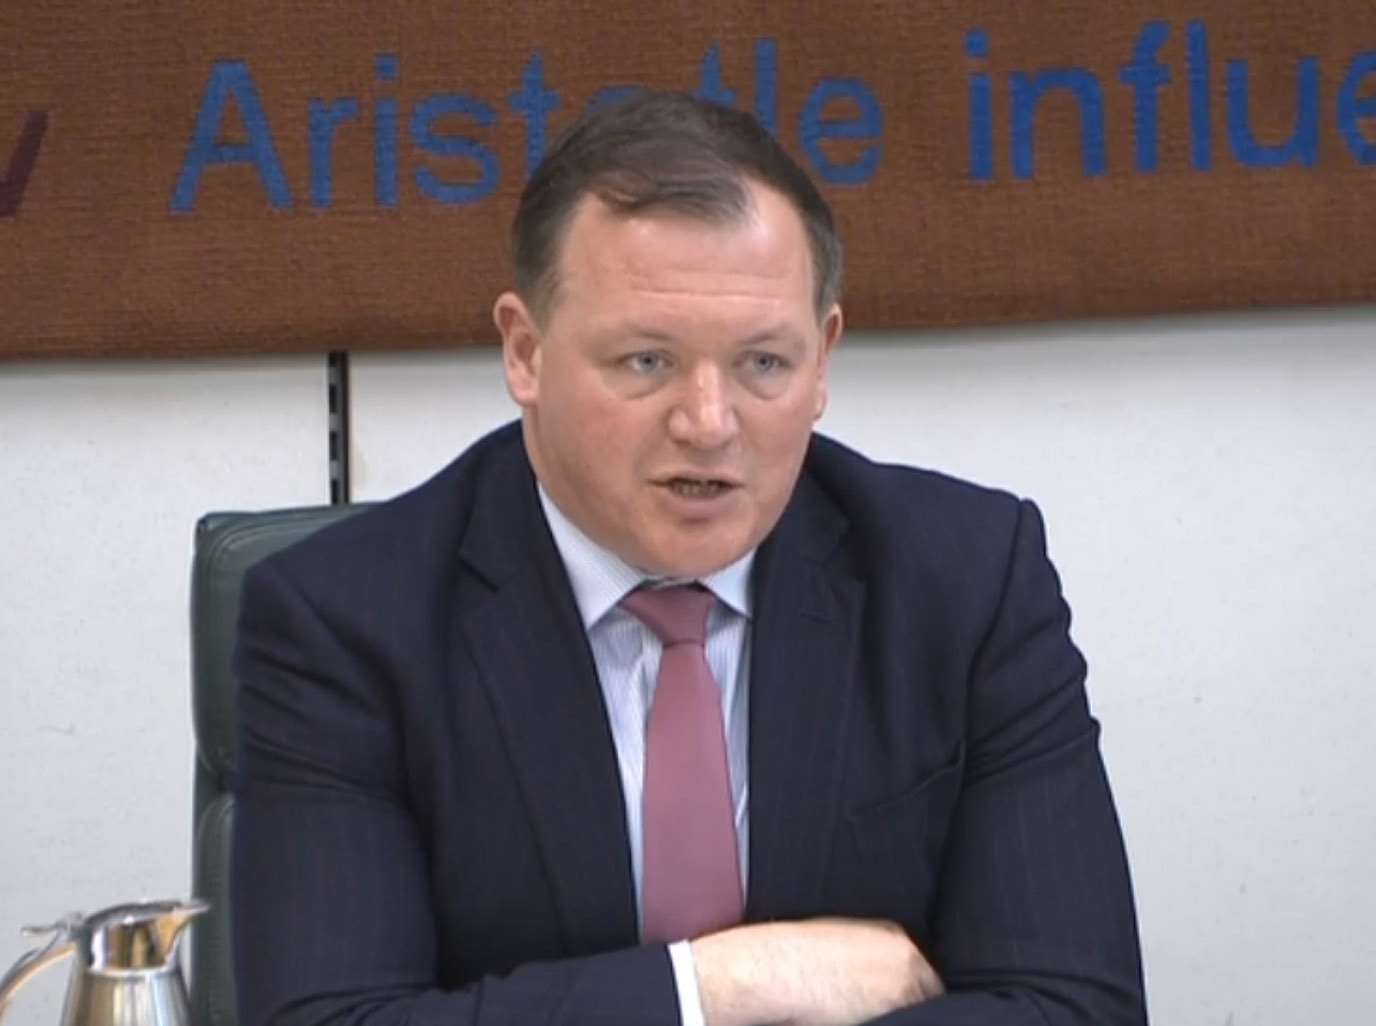 Damian Collins said it should be an “offence” to distribute misleading information during the ongoing health crisis (PA)